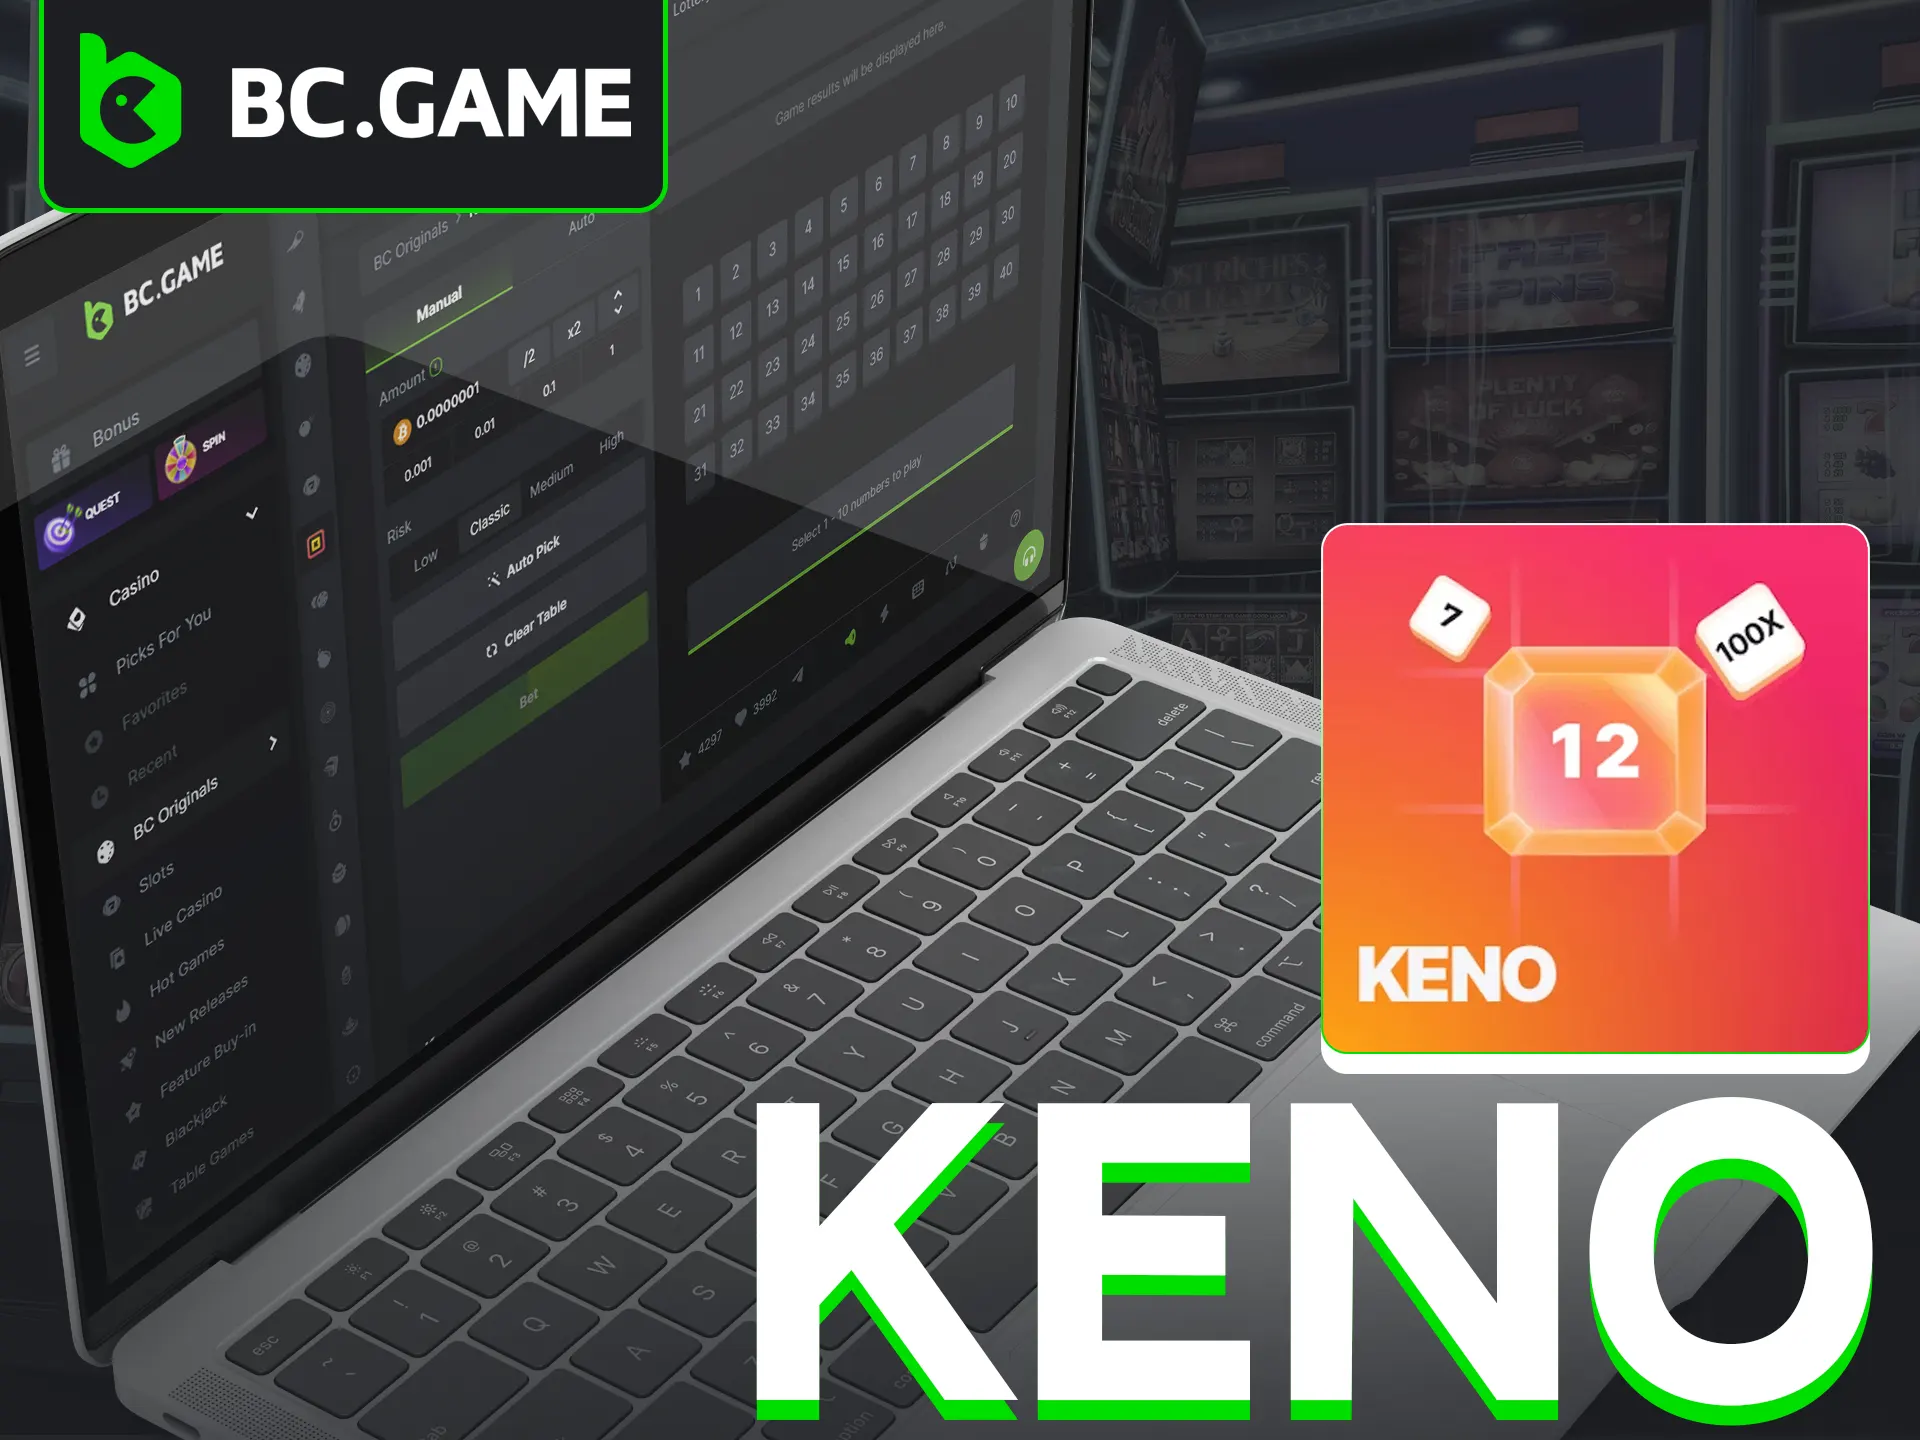 Play Keno at BC Game, match numbers to win and cash.